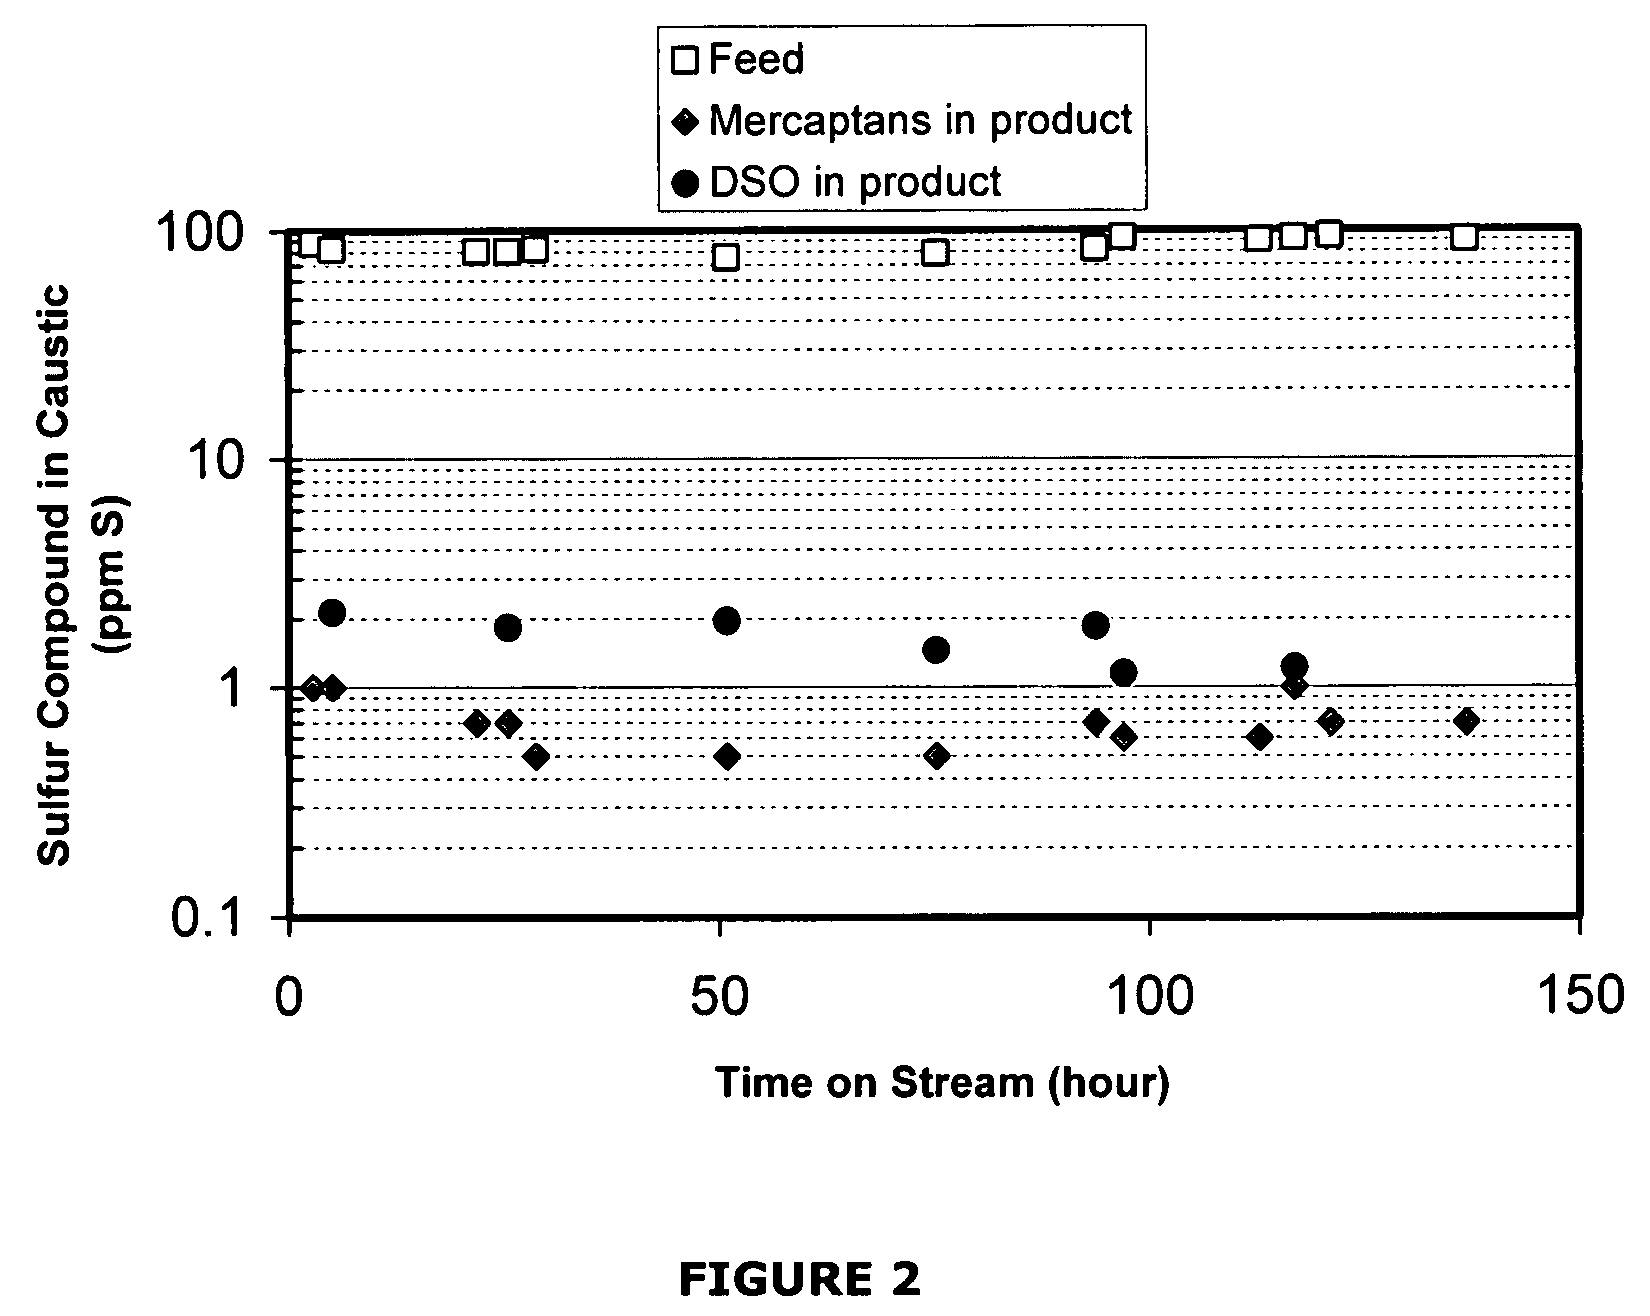 Removal of residual sulfur compounds from a caustic stream